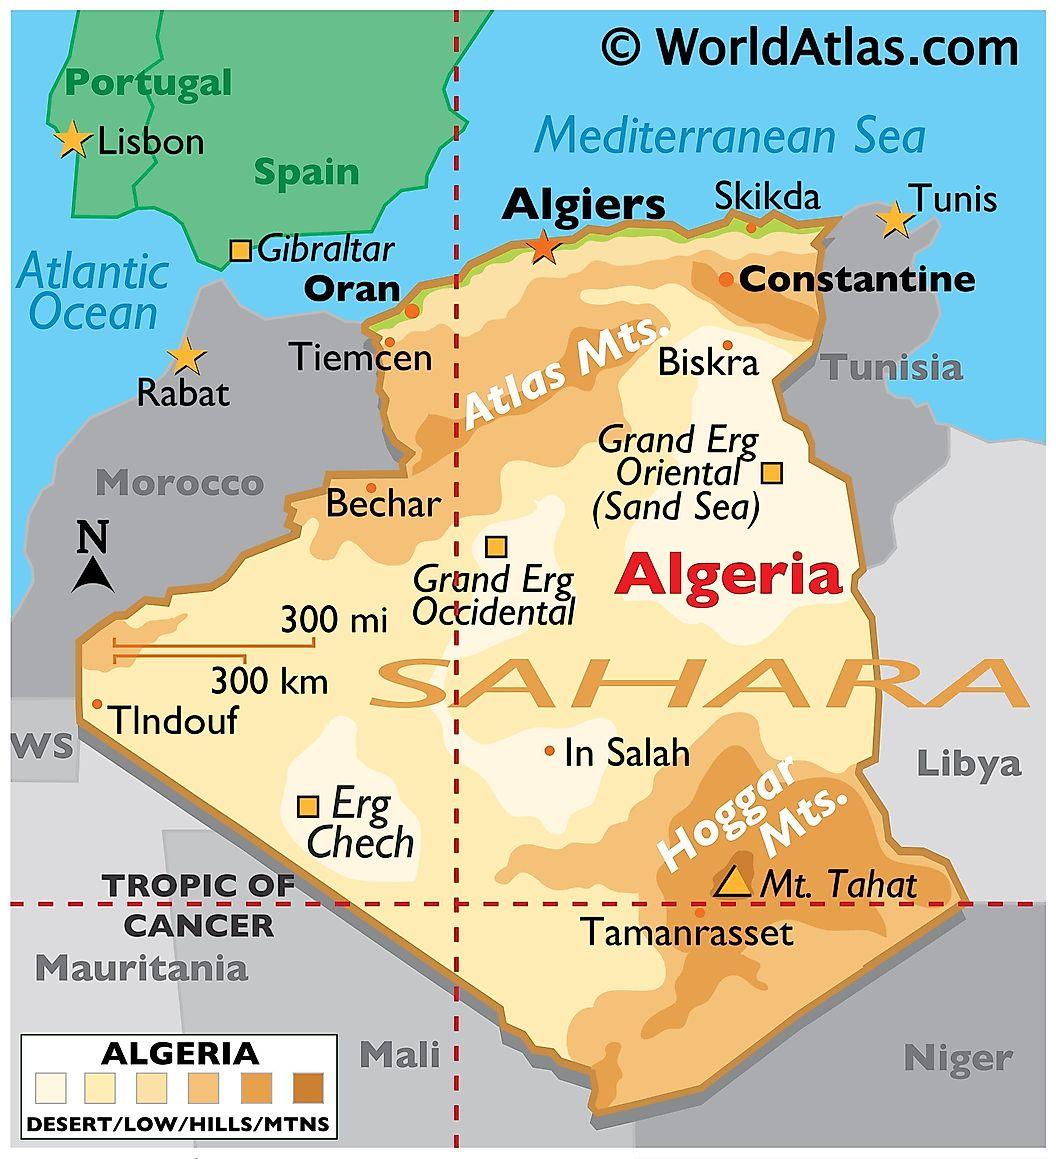 A map of Algeria, showing the different regions of the country